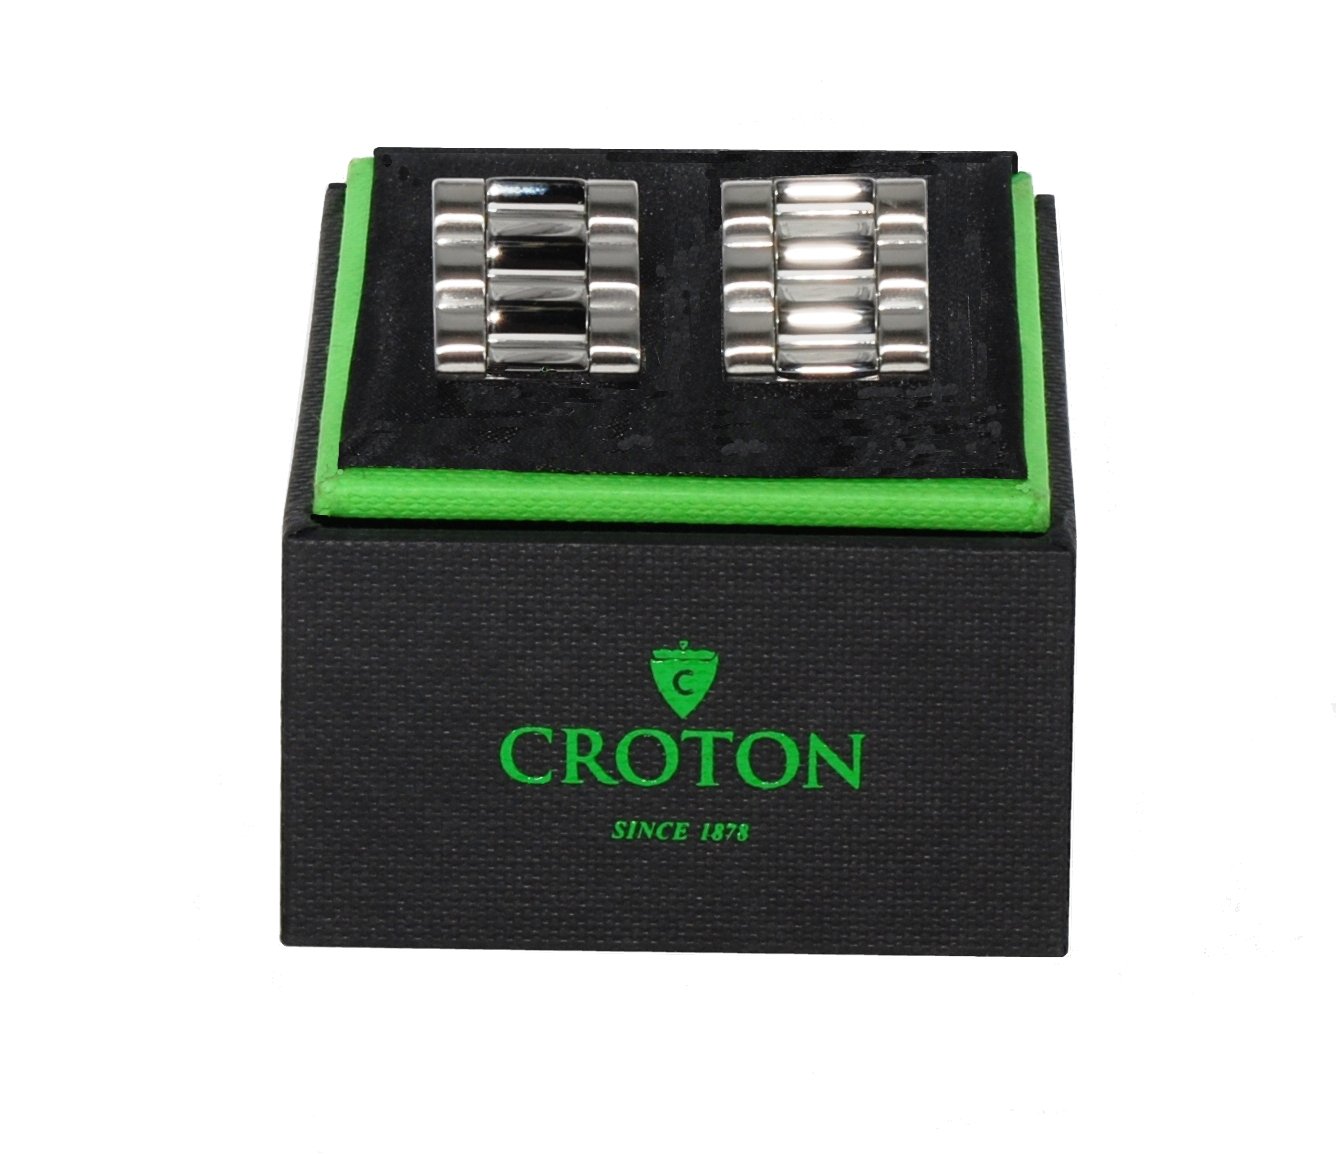 Croton Stainless Steel Silver Cuff Links - CROTON GROUP